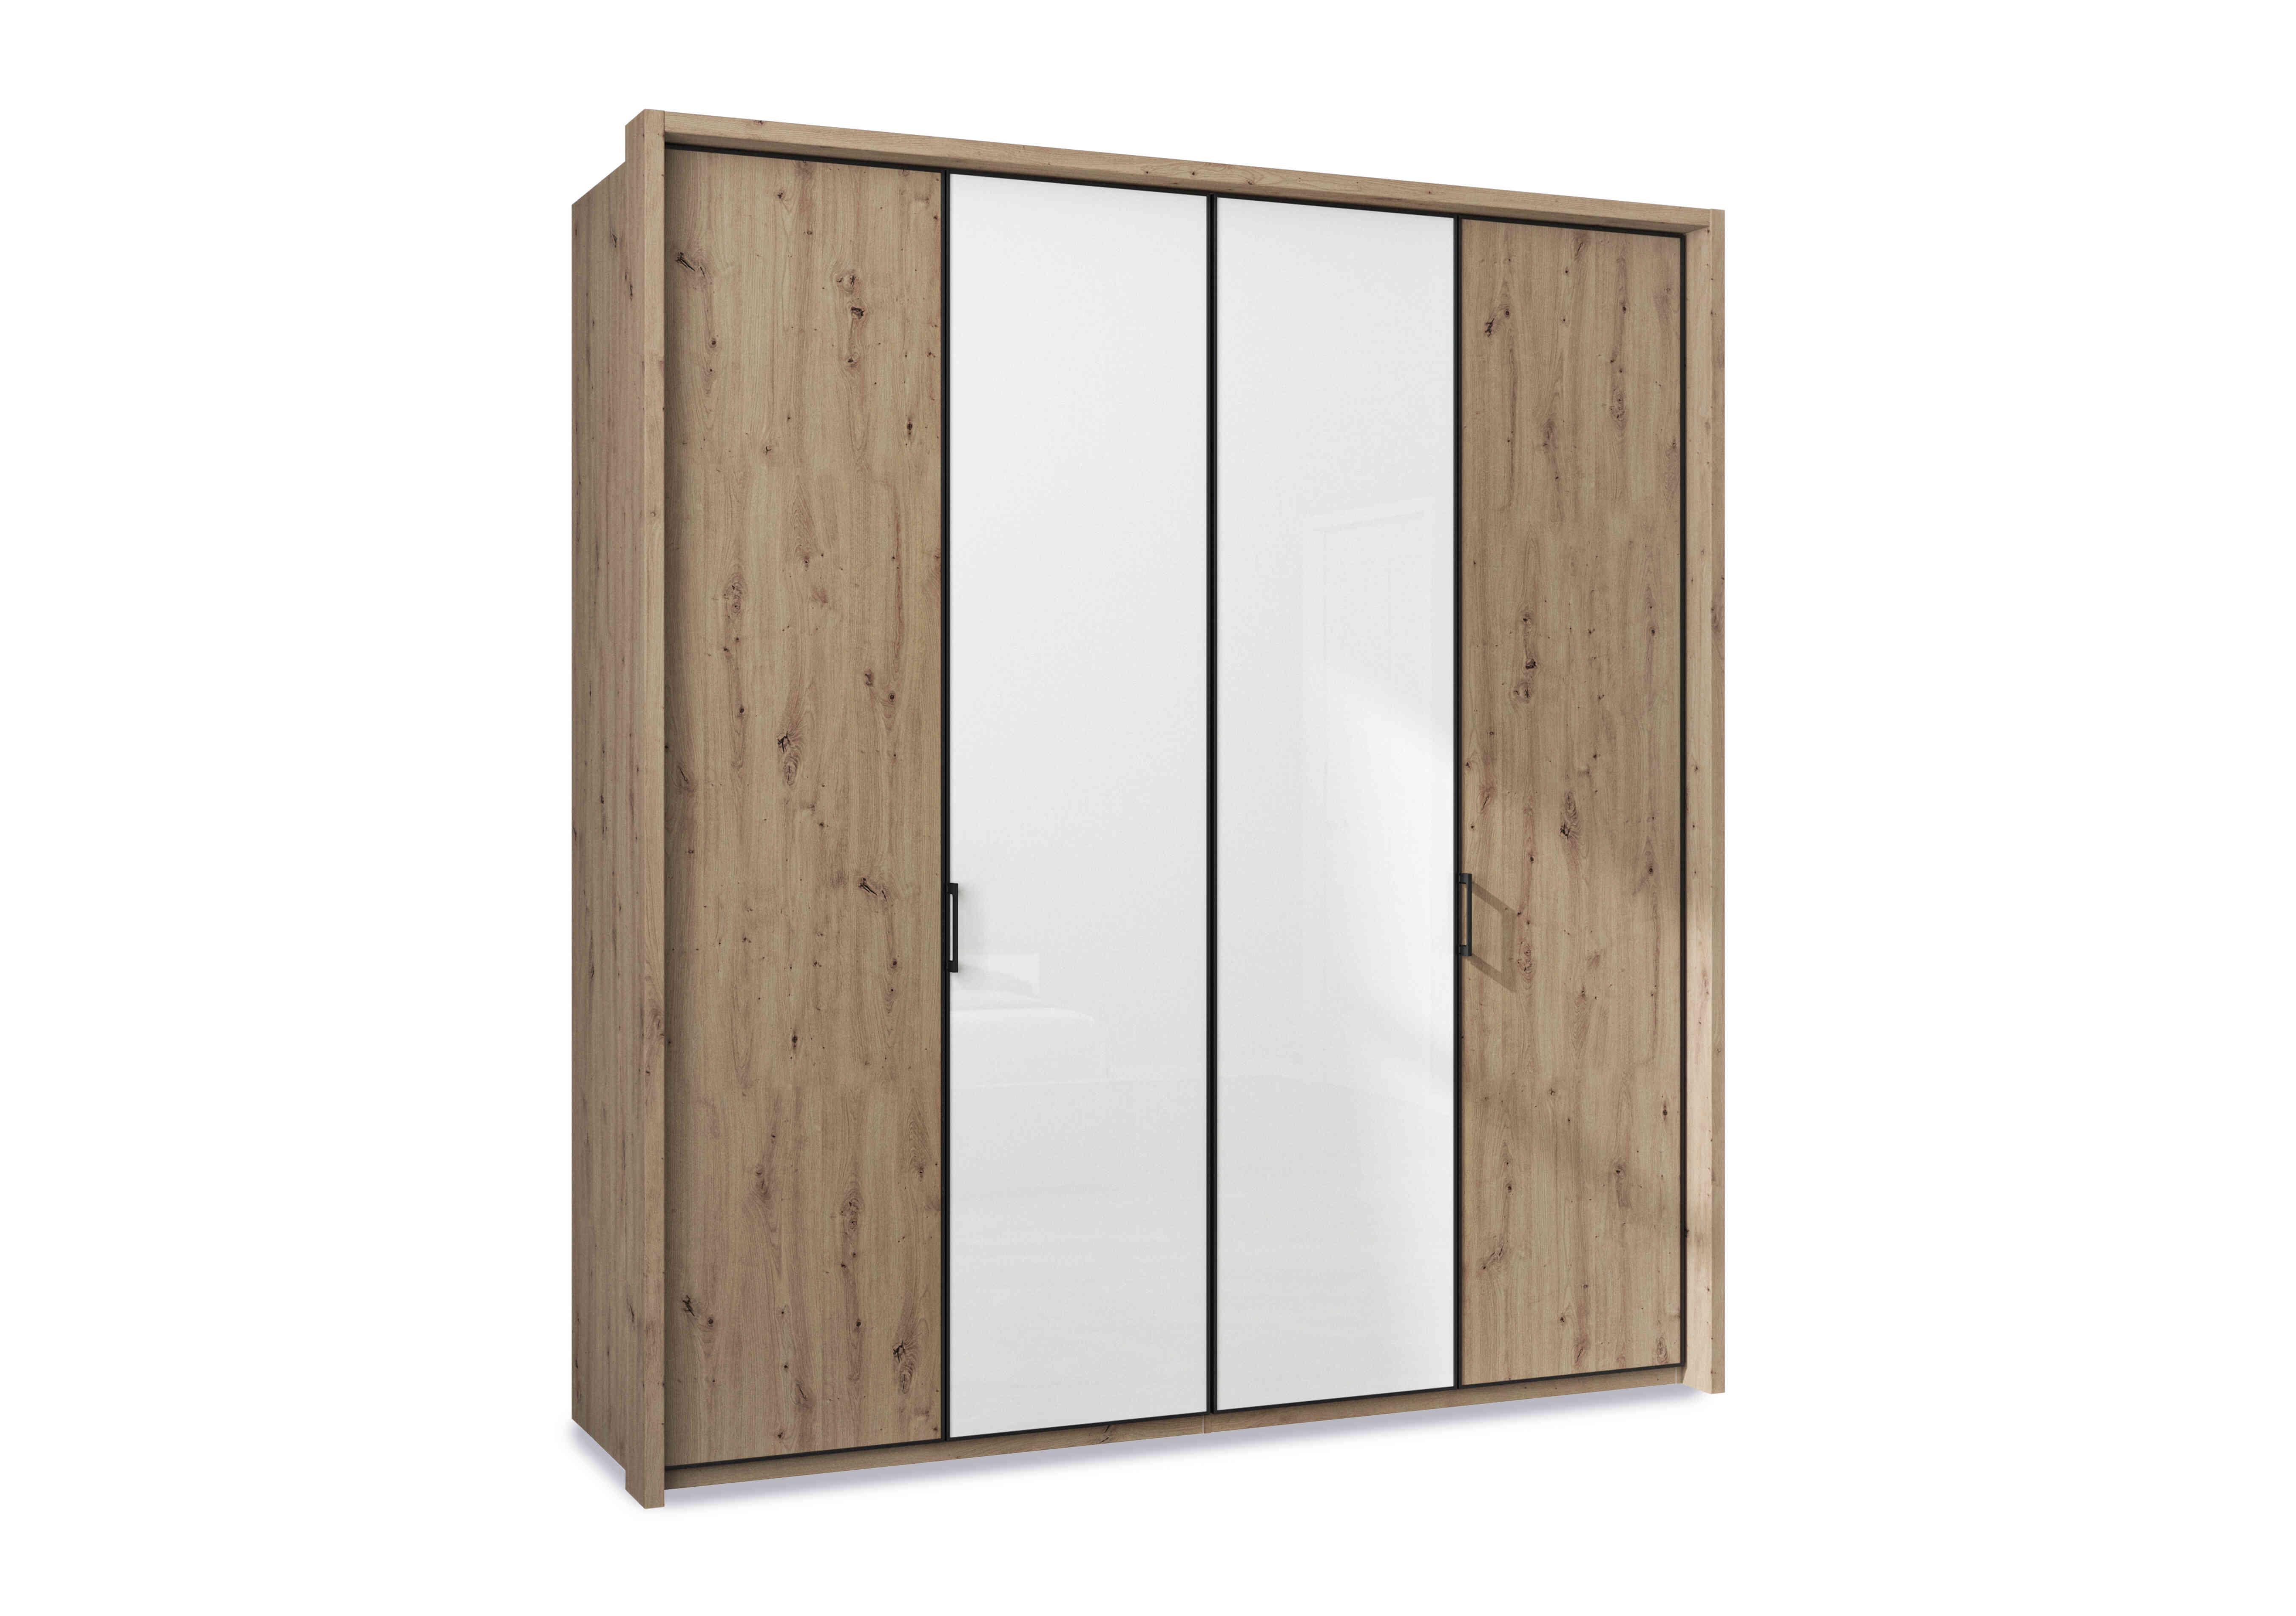 Dallas 207cm 4 Door Hinged Wardrobe with 2 Glass Doors in Bianco Oak And White on Furniture Village